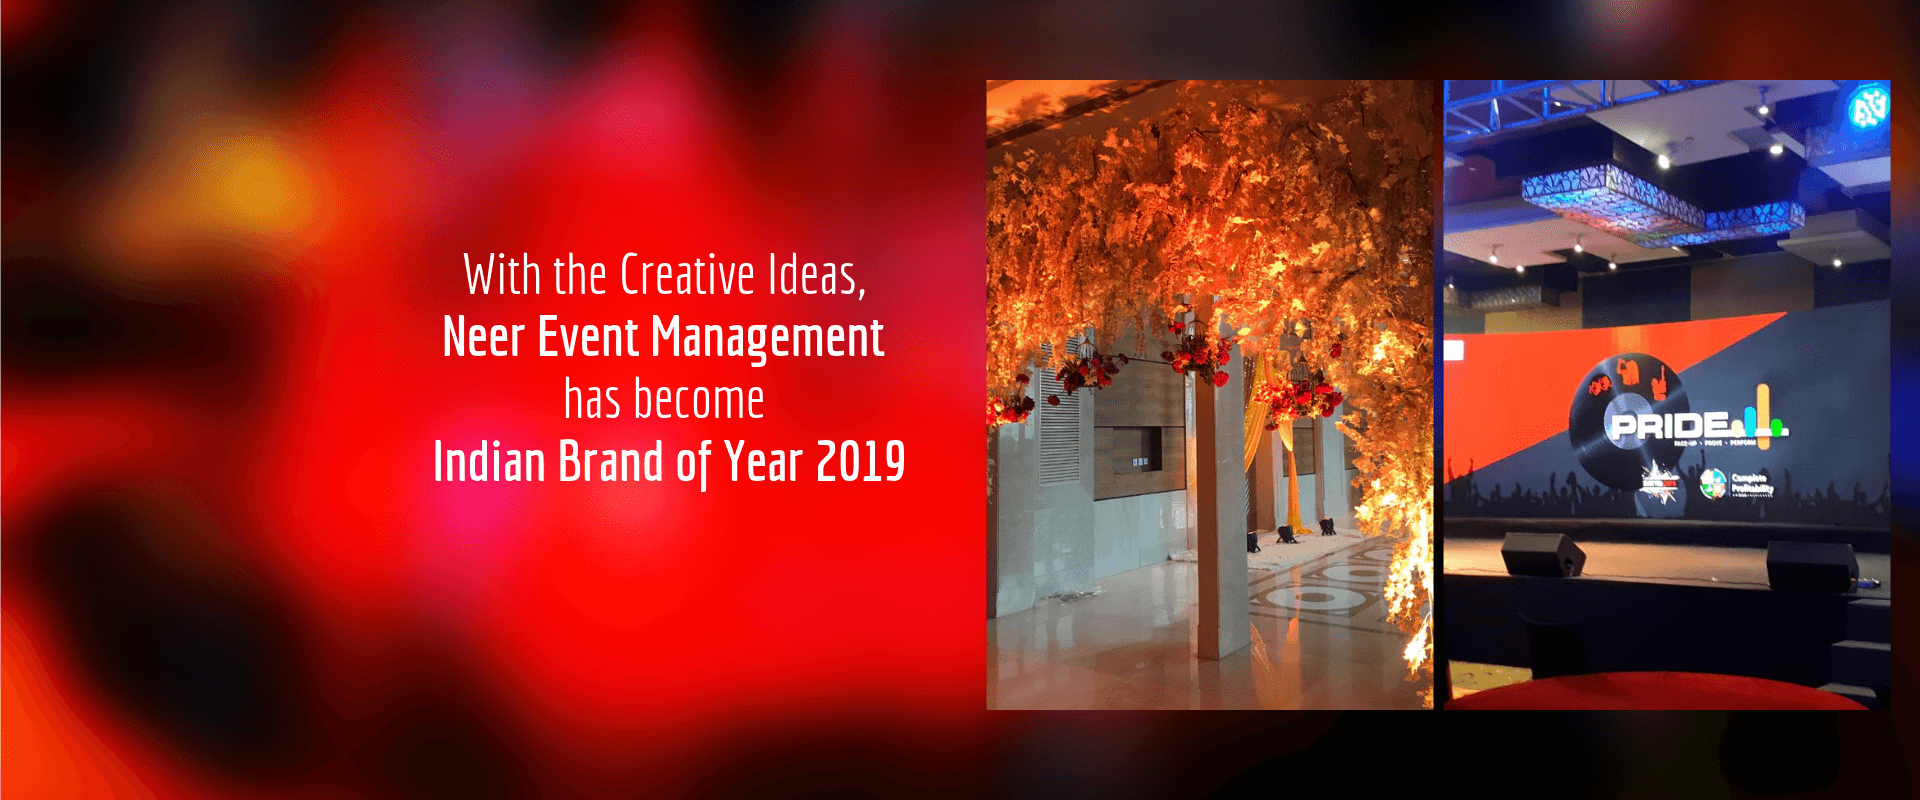 With-the-Creative-Ideas-Neer-Event-Management-has-become-Indian-Brand-of-Year-2019